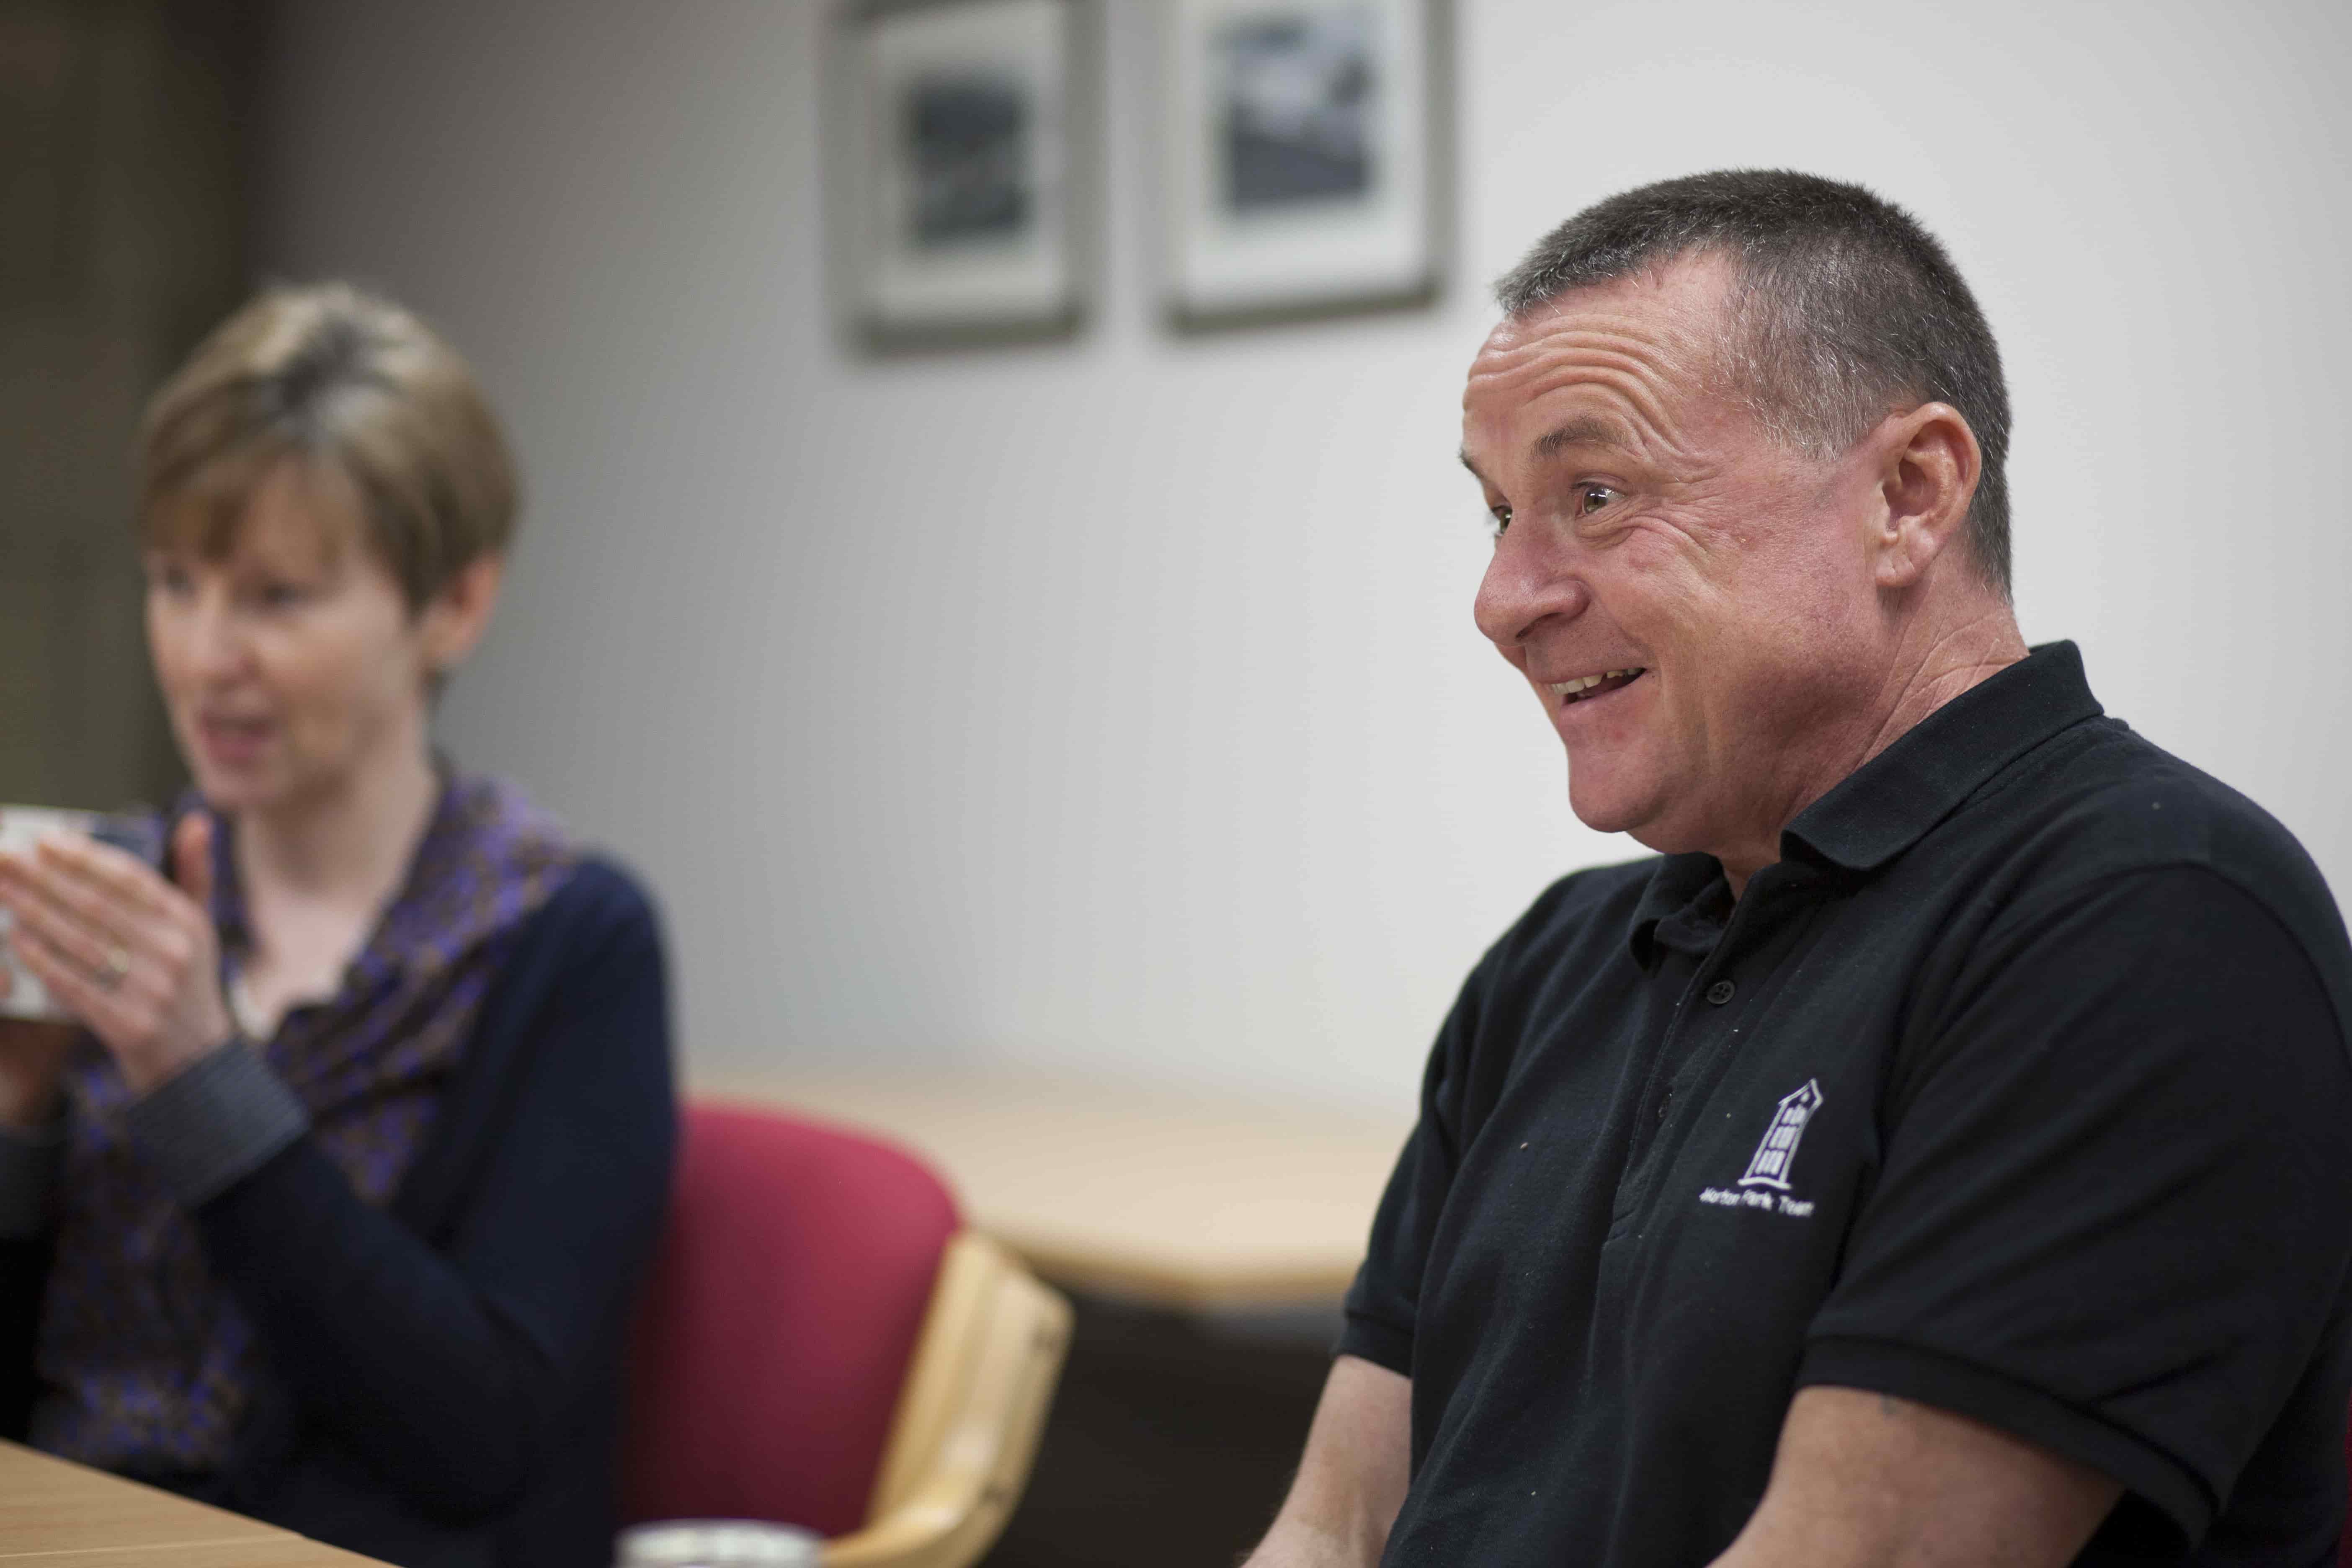 A member of the Albion Trust Team smiles while listening to someone in a conversation.